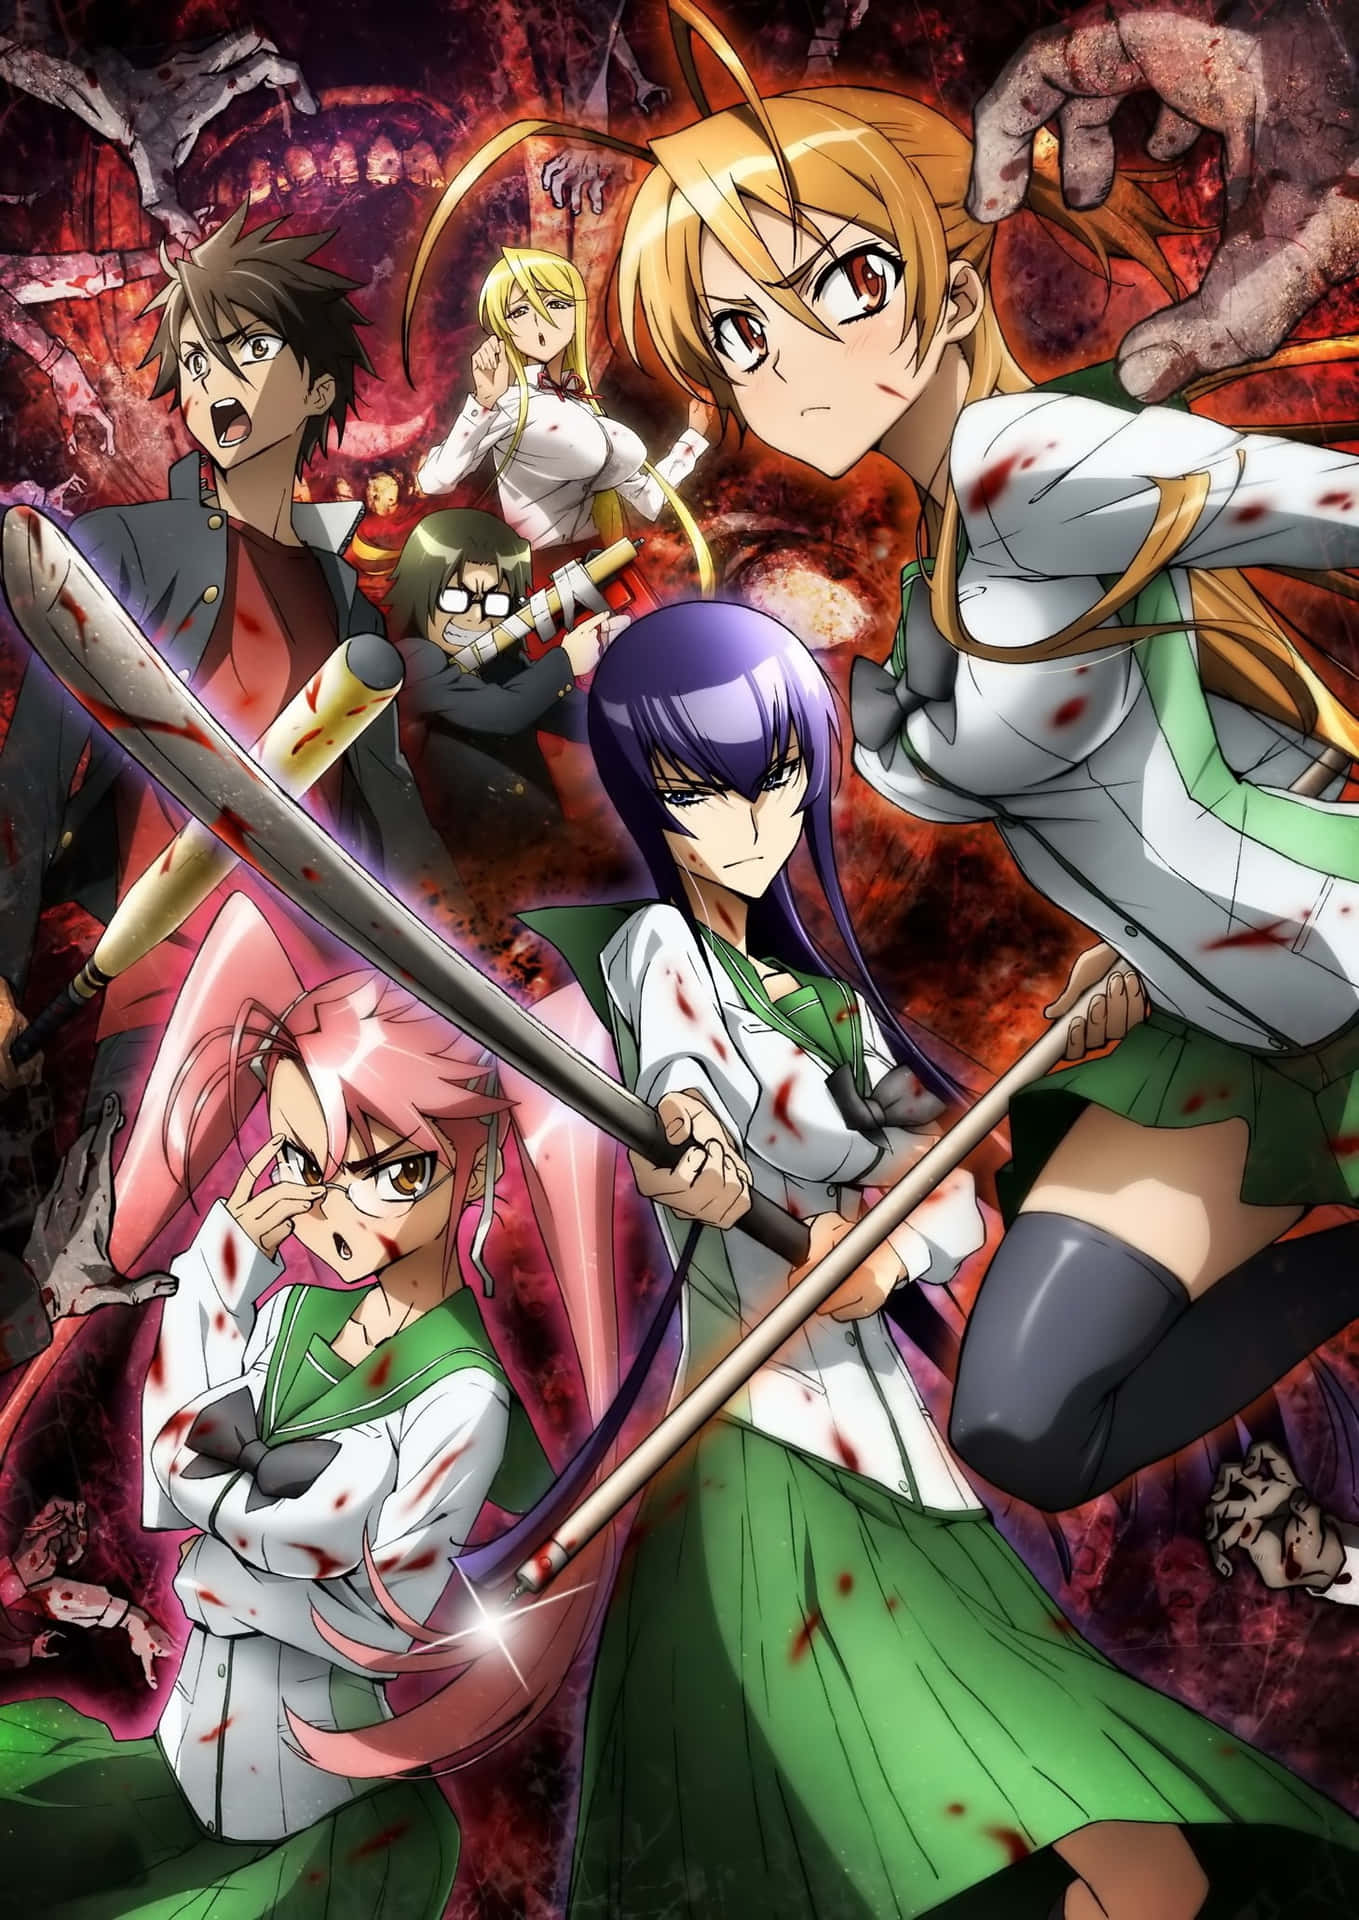 Students from Highschool of the Dead fight together against the hordes of Zombies